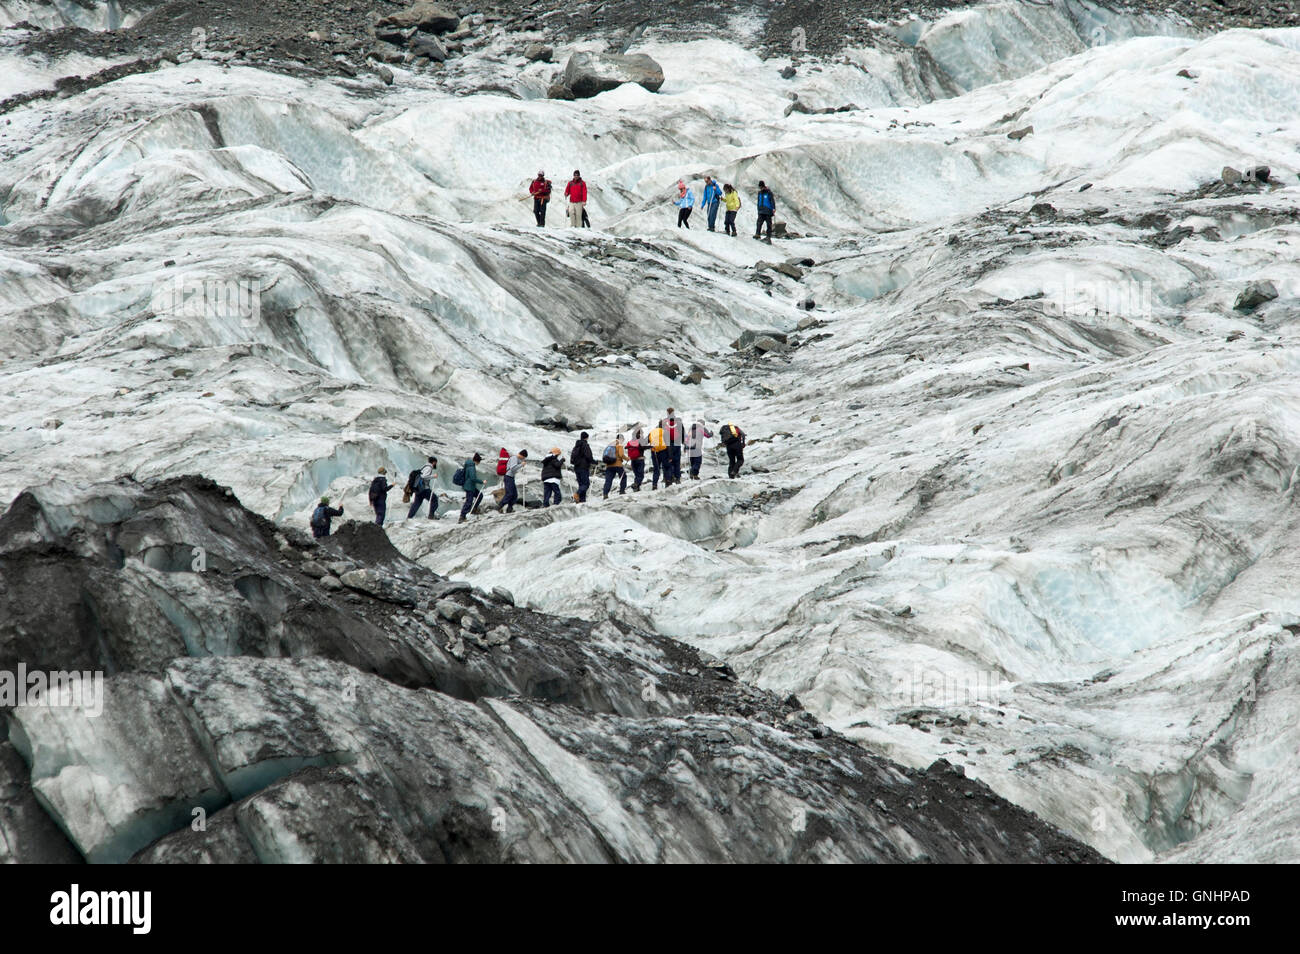 On top of Fox glacier in the Southern Alps of New Zealand tourist are guided in spectacular tours. Stock Photo